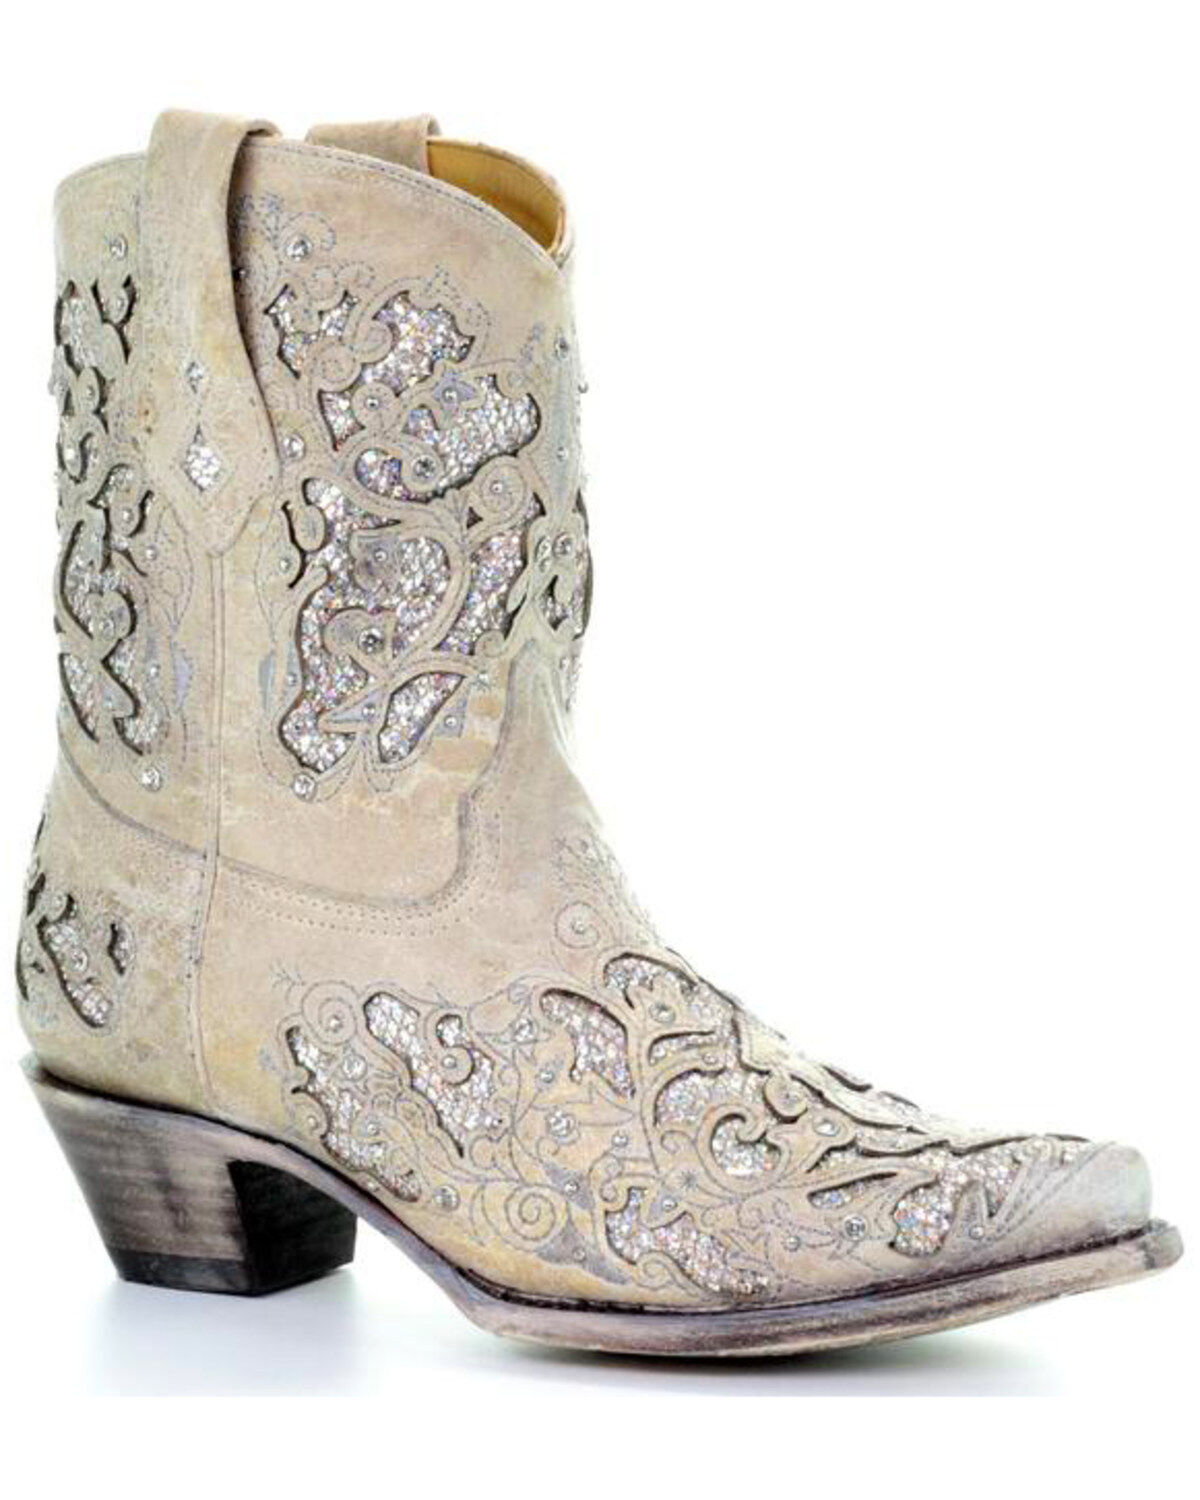 Corral Ladies White w/Teal Glitter Inlay & Crystals Snip Toe Boots A3321 SALE! 